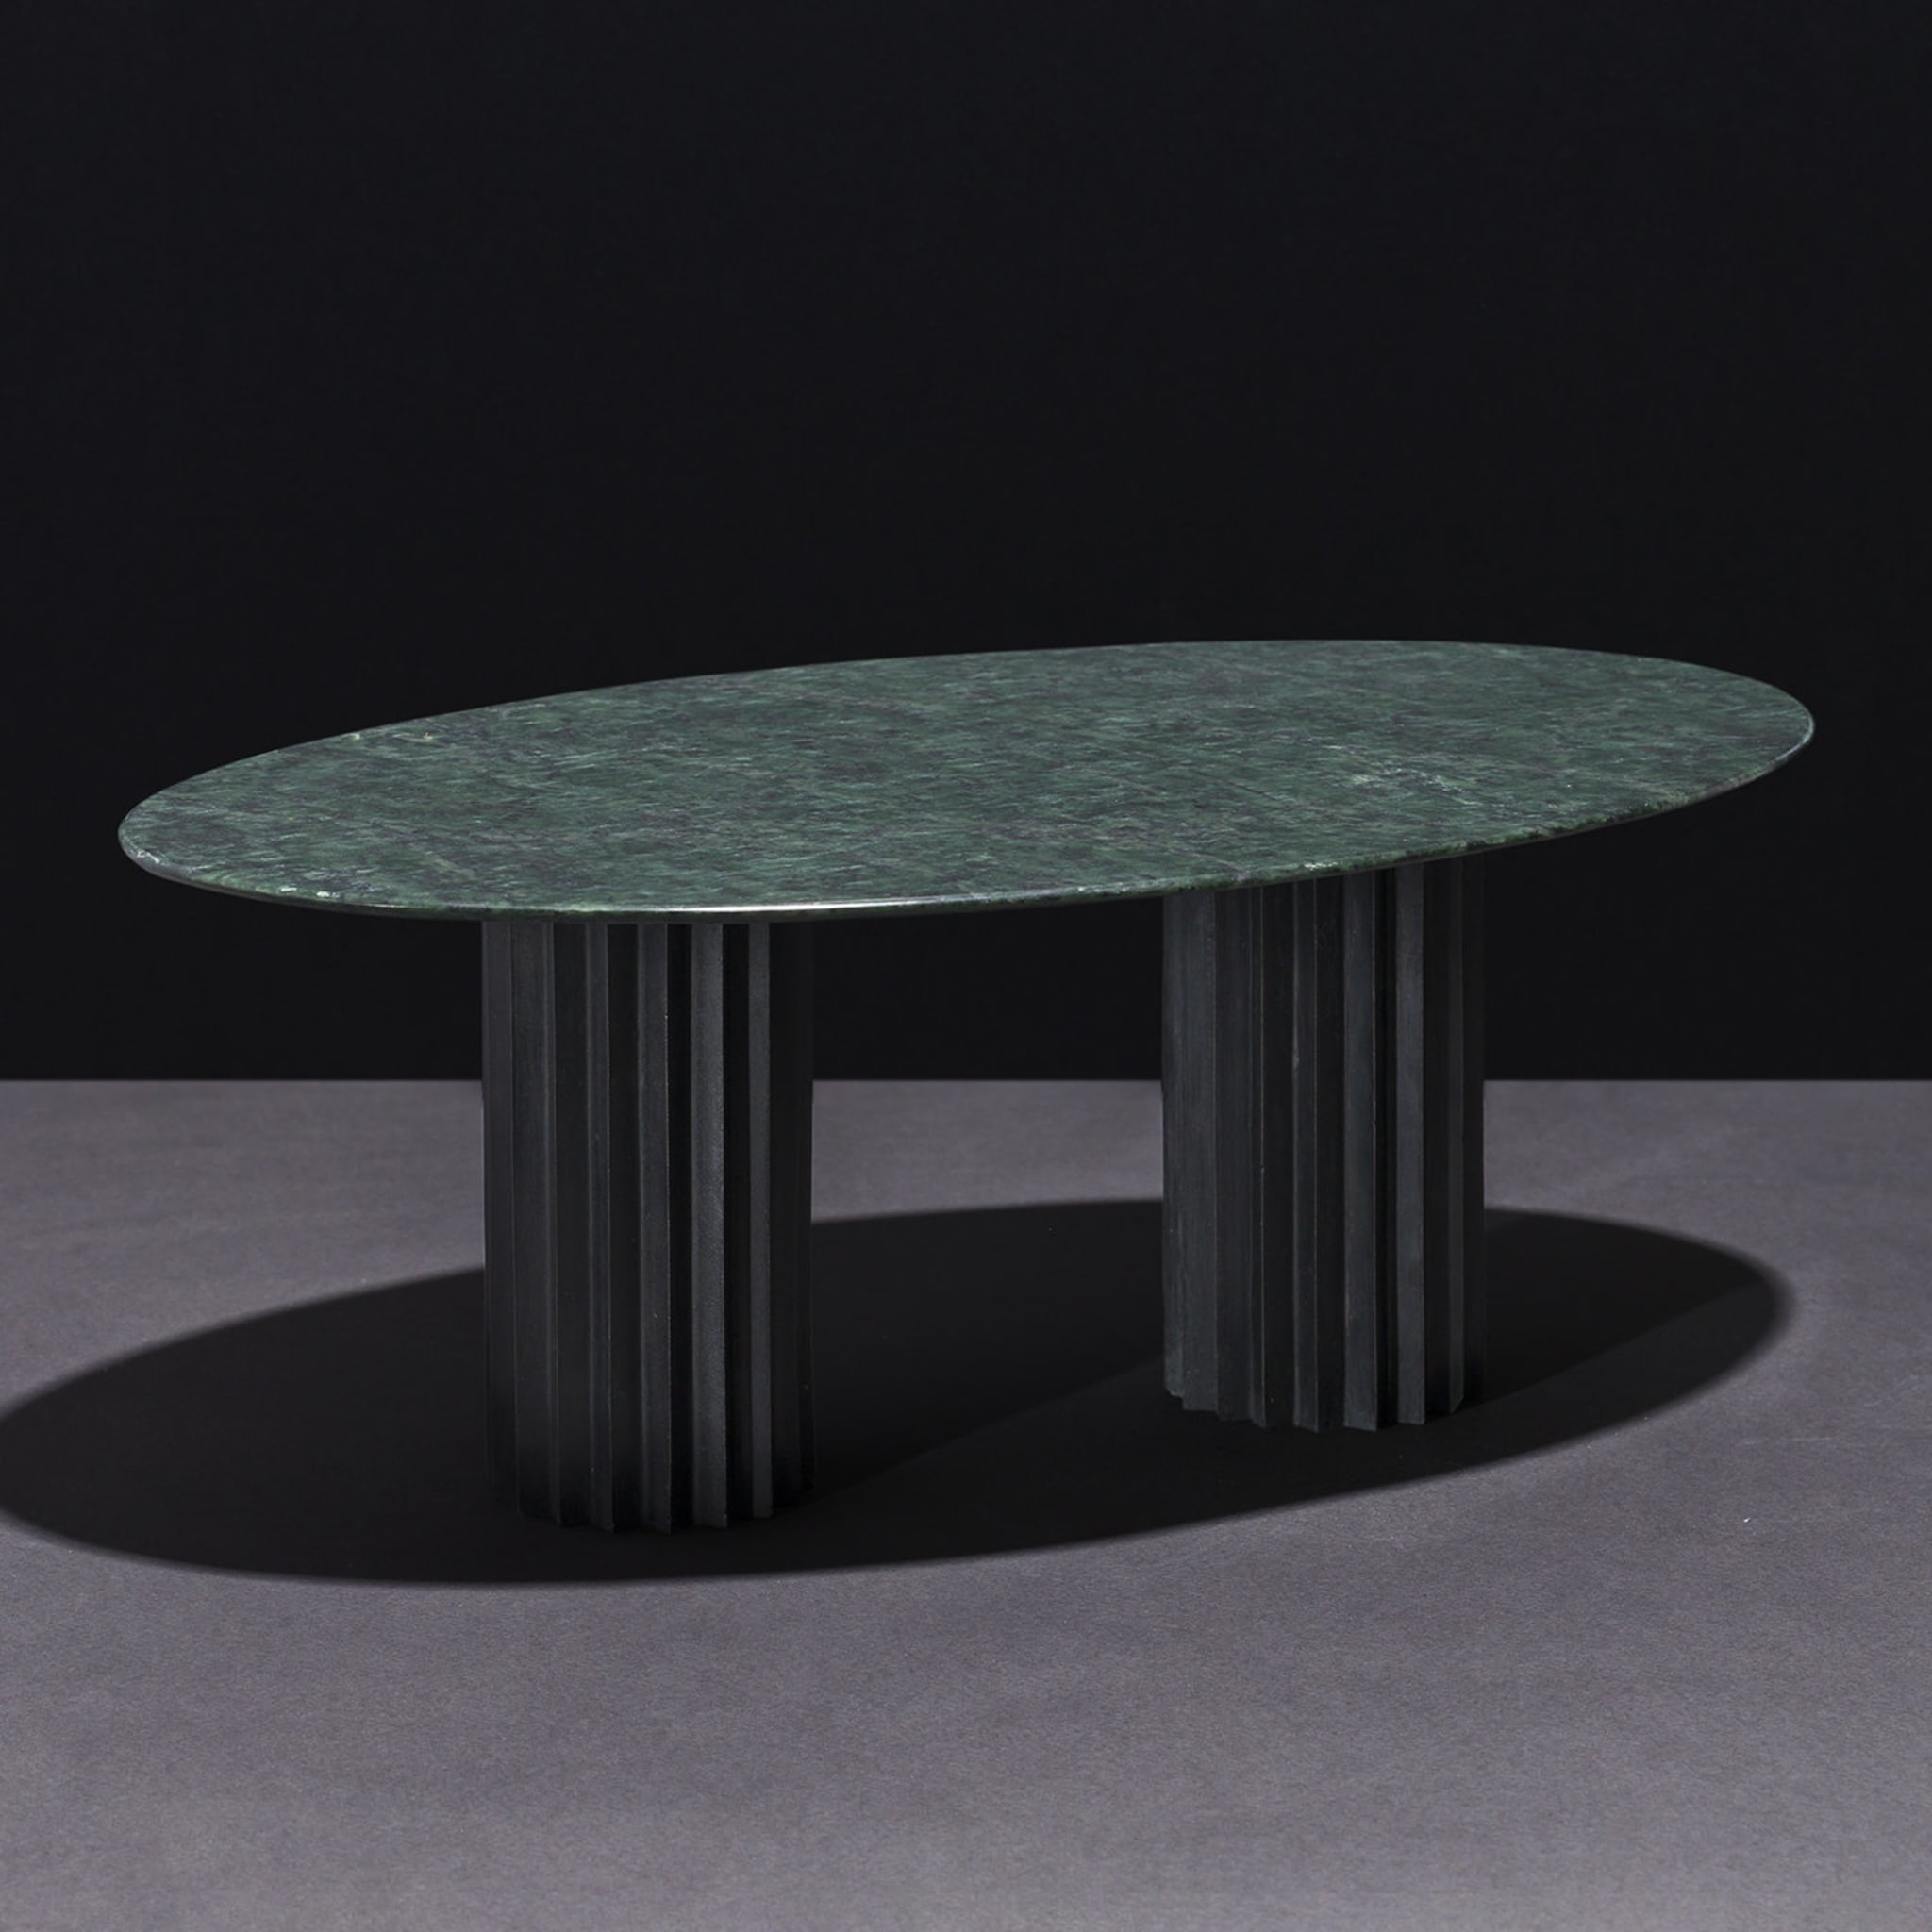 Doris Oval Dining Table in Green Marble and Bronze - Alternative view 1